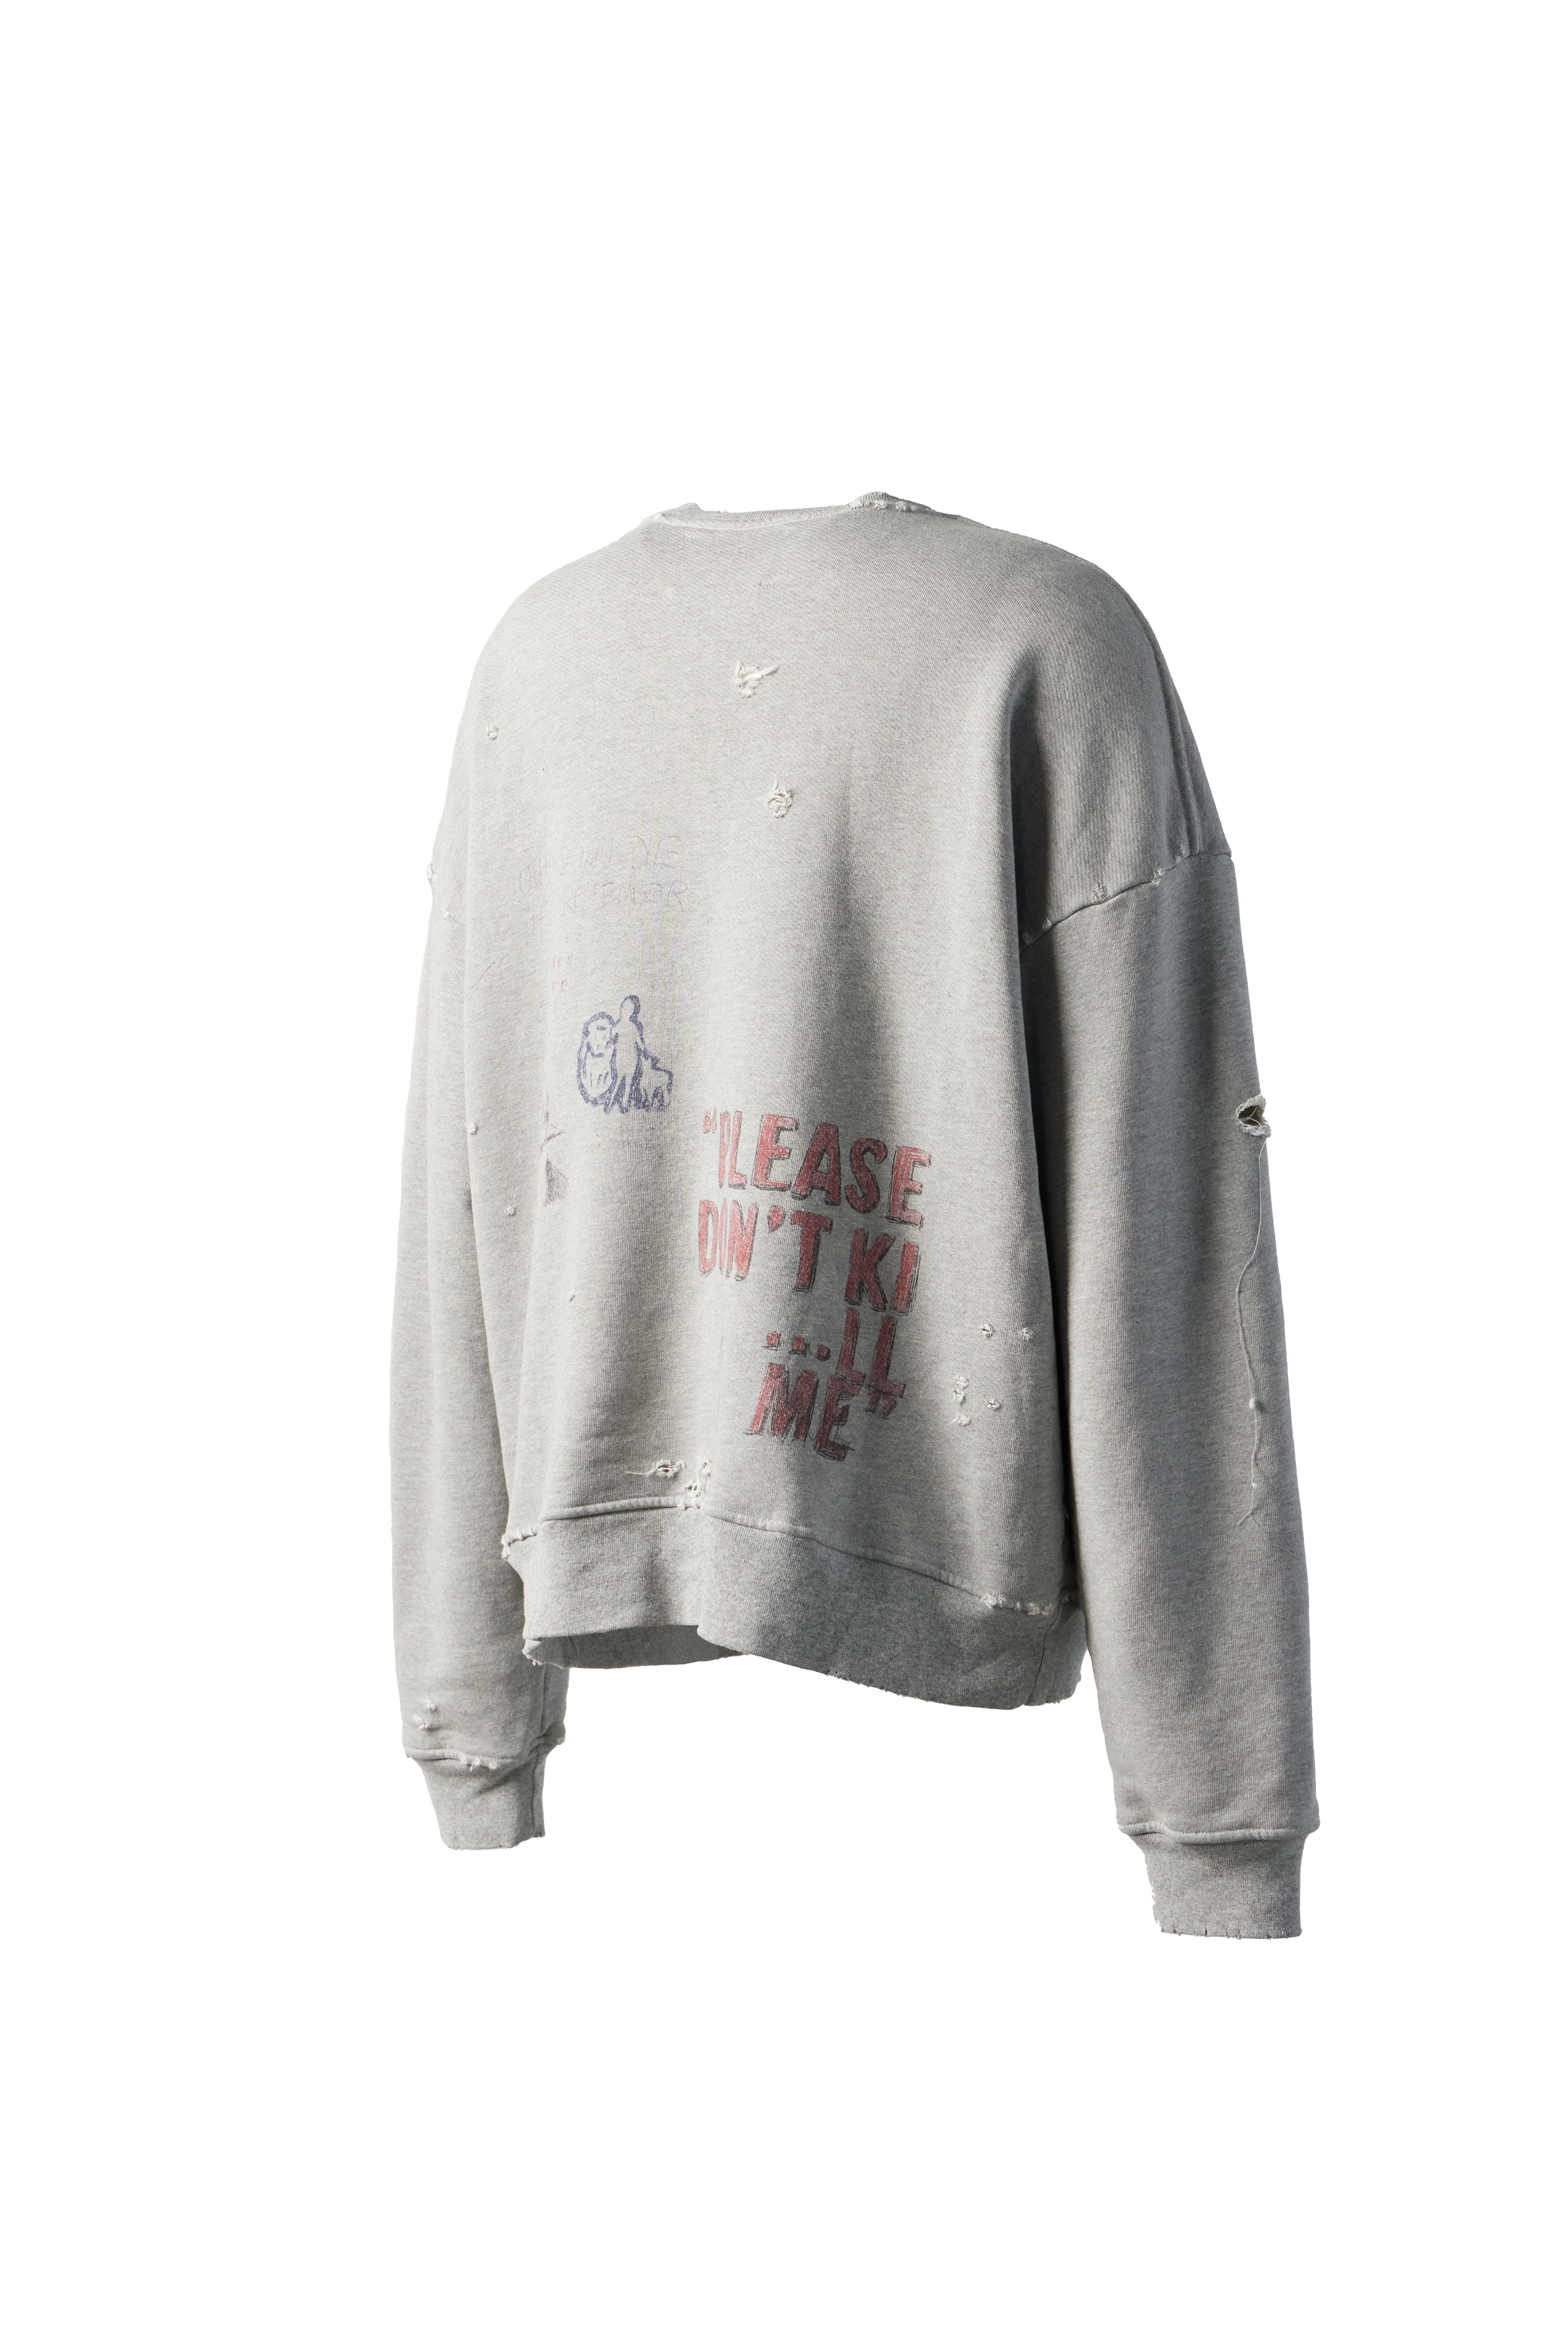 PALY - Free Clinic Crewneck product image